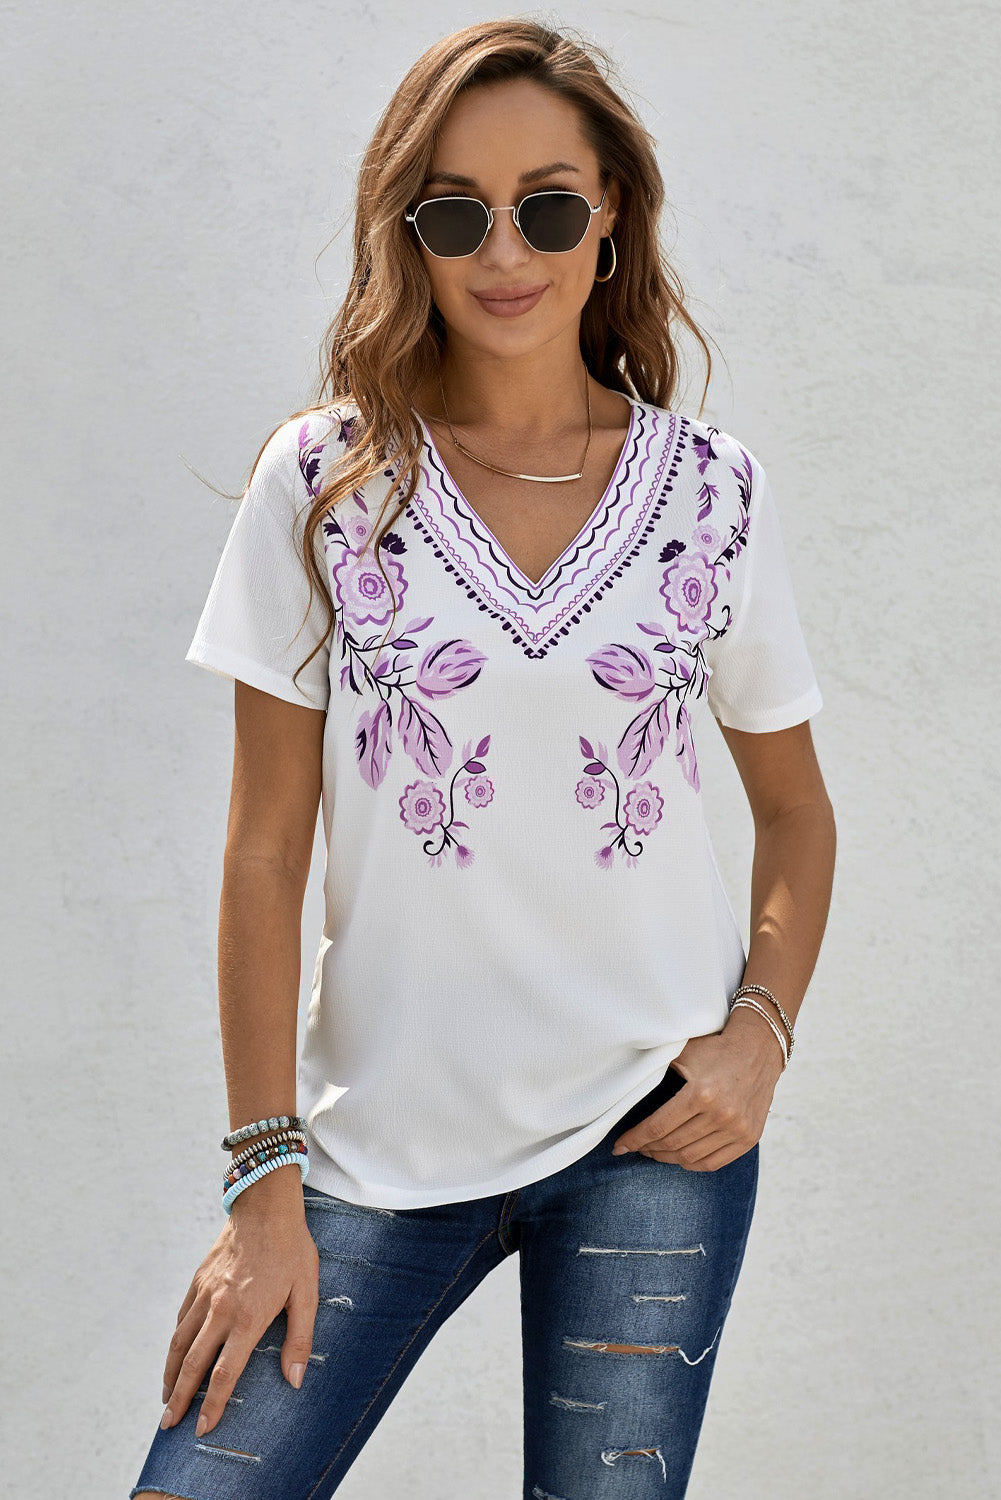 Women White Purple Floral Embroidery V Neck Short Sleeve T-Shirt